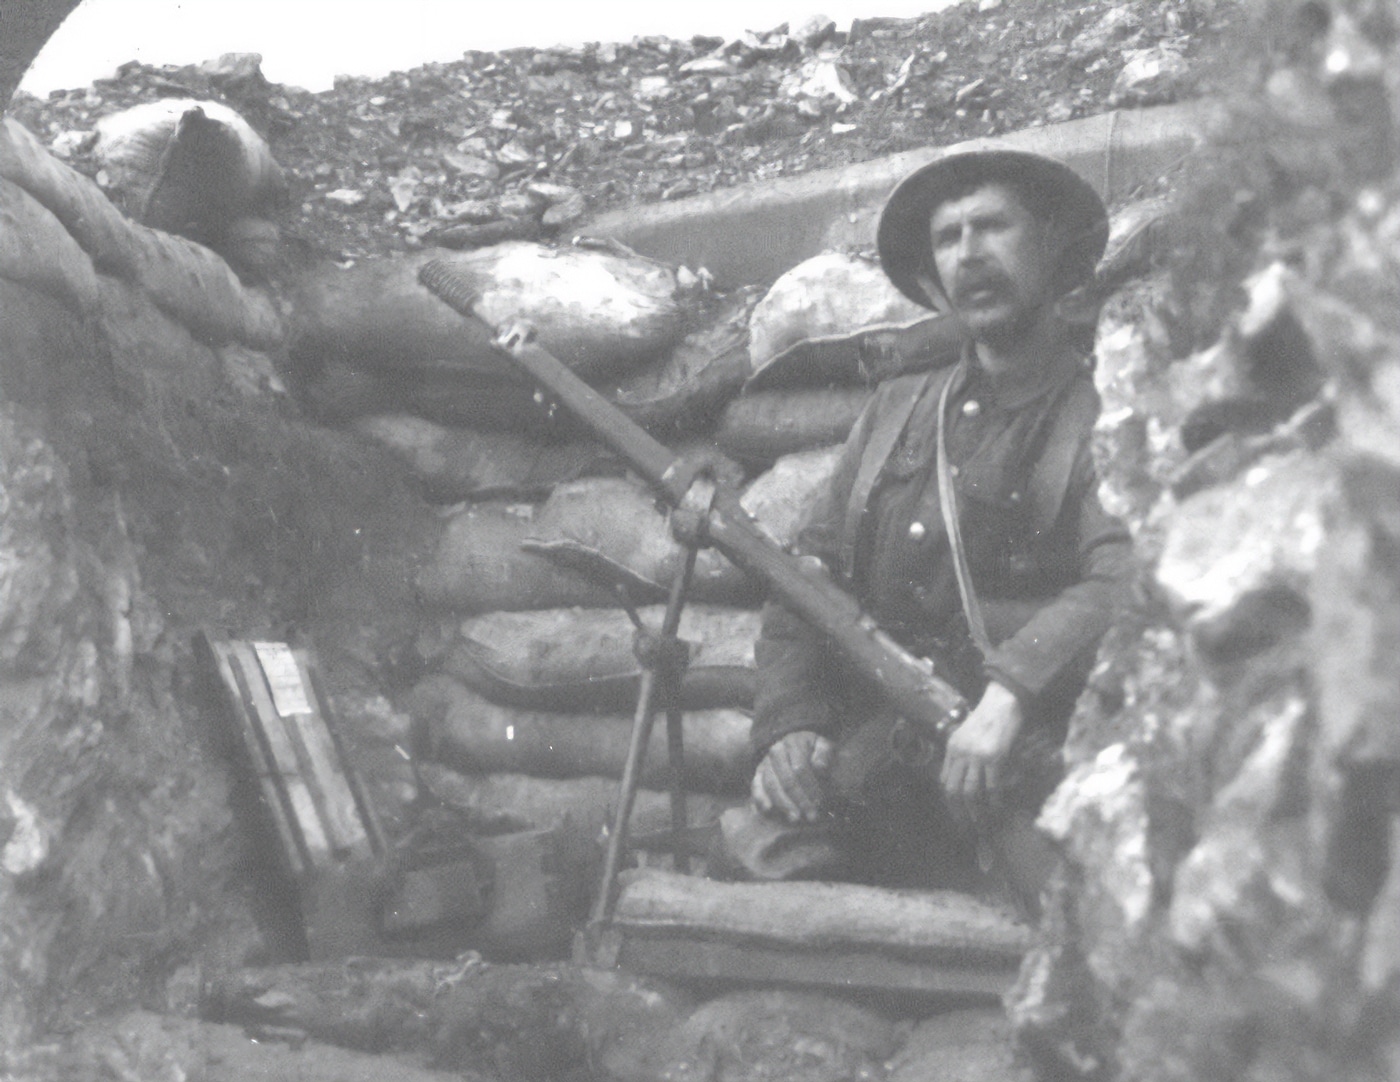 Shown in this rare photograph is a Hales rifle grenade No. 3 in the hands of a British soldier. The soldier is in a front line trench somewhere in the Balkans during World War I. A wooden case of additional grenades is in front of him. His rifle is on a bipod which was specific to the launcher.